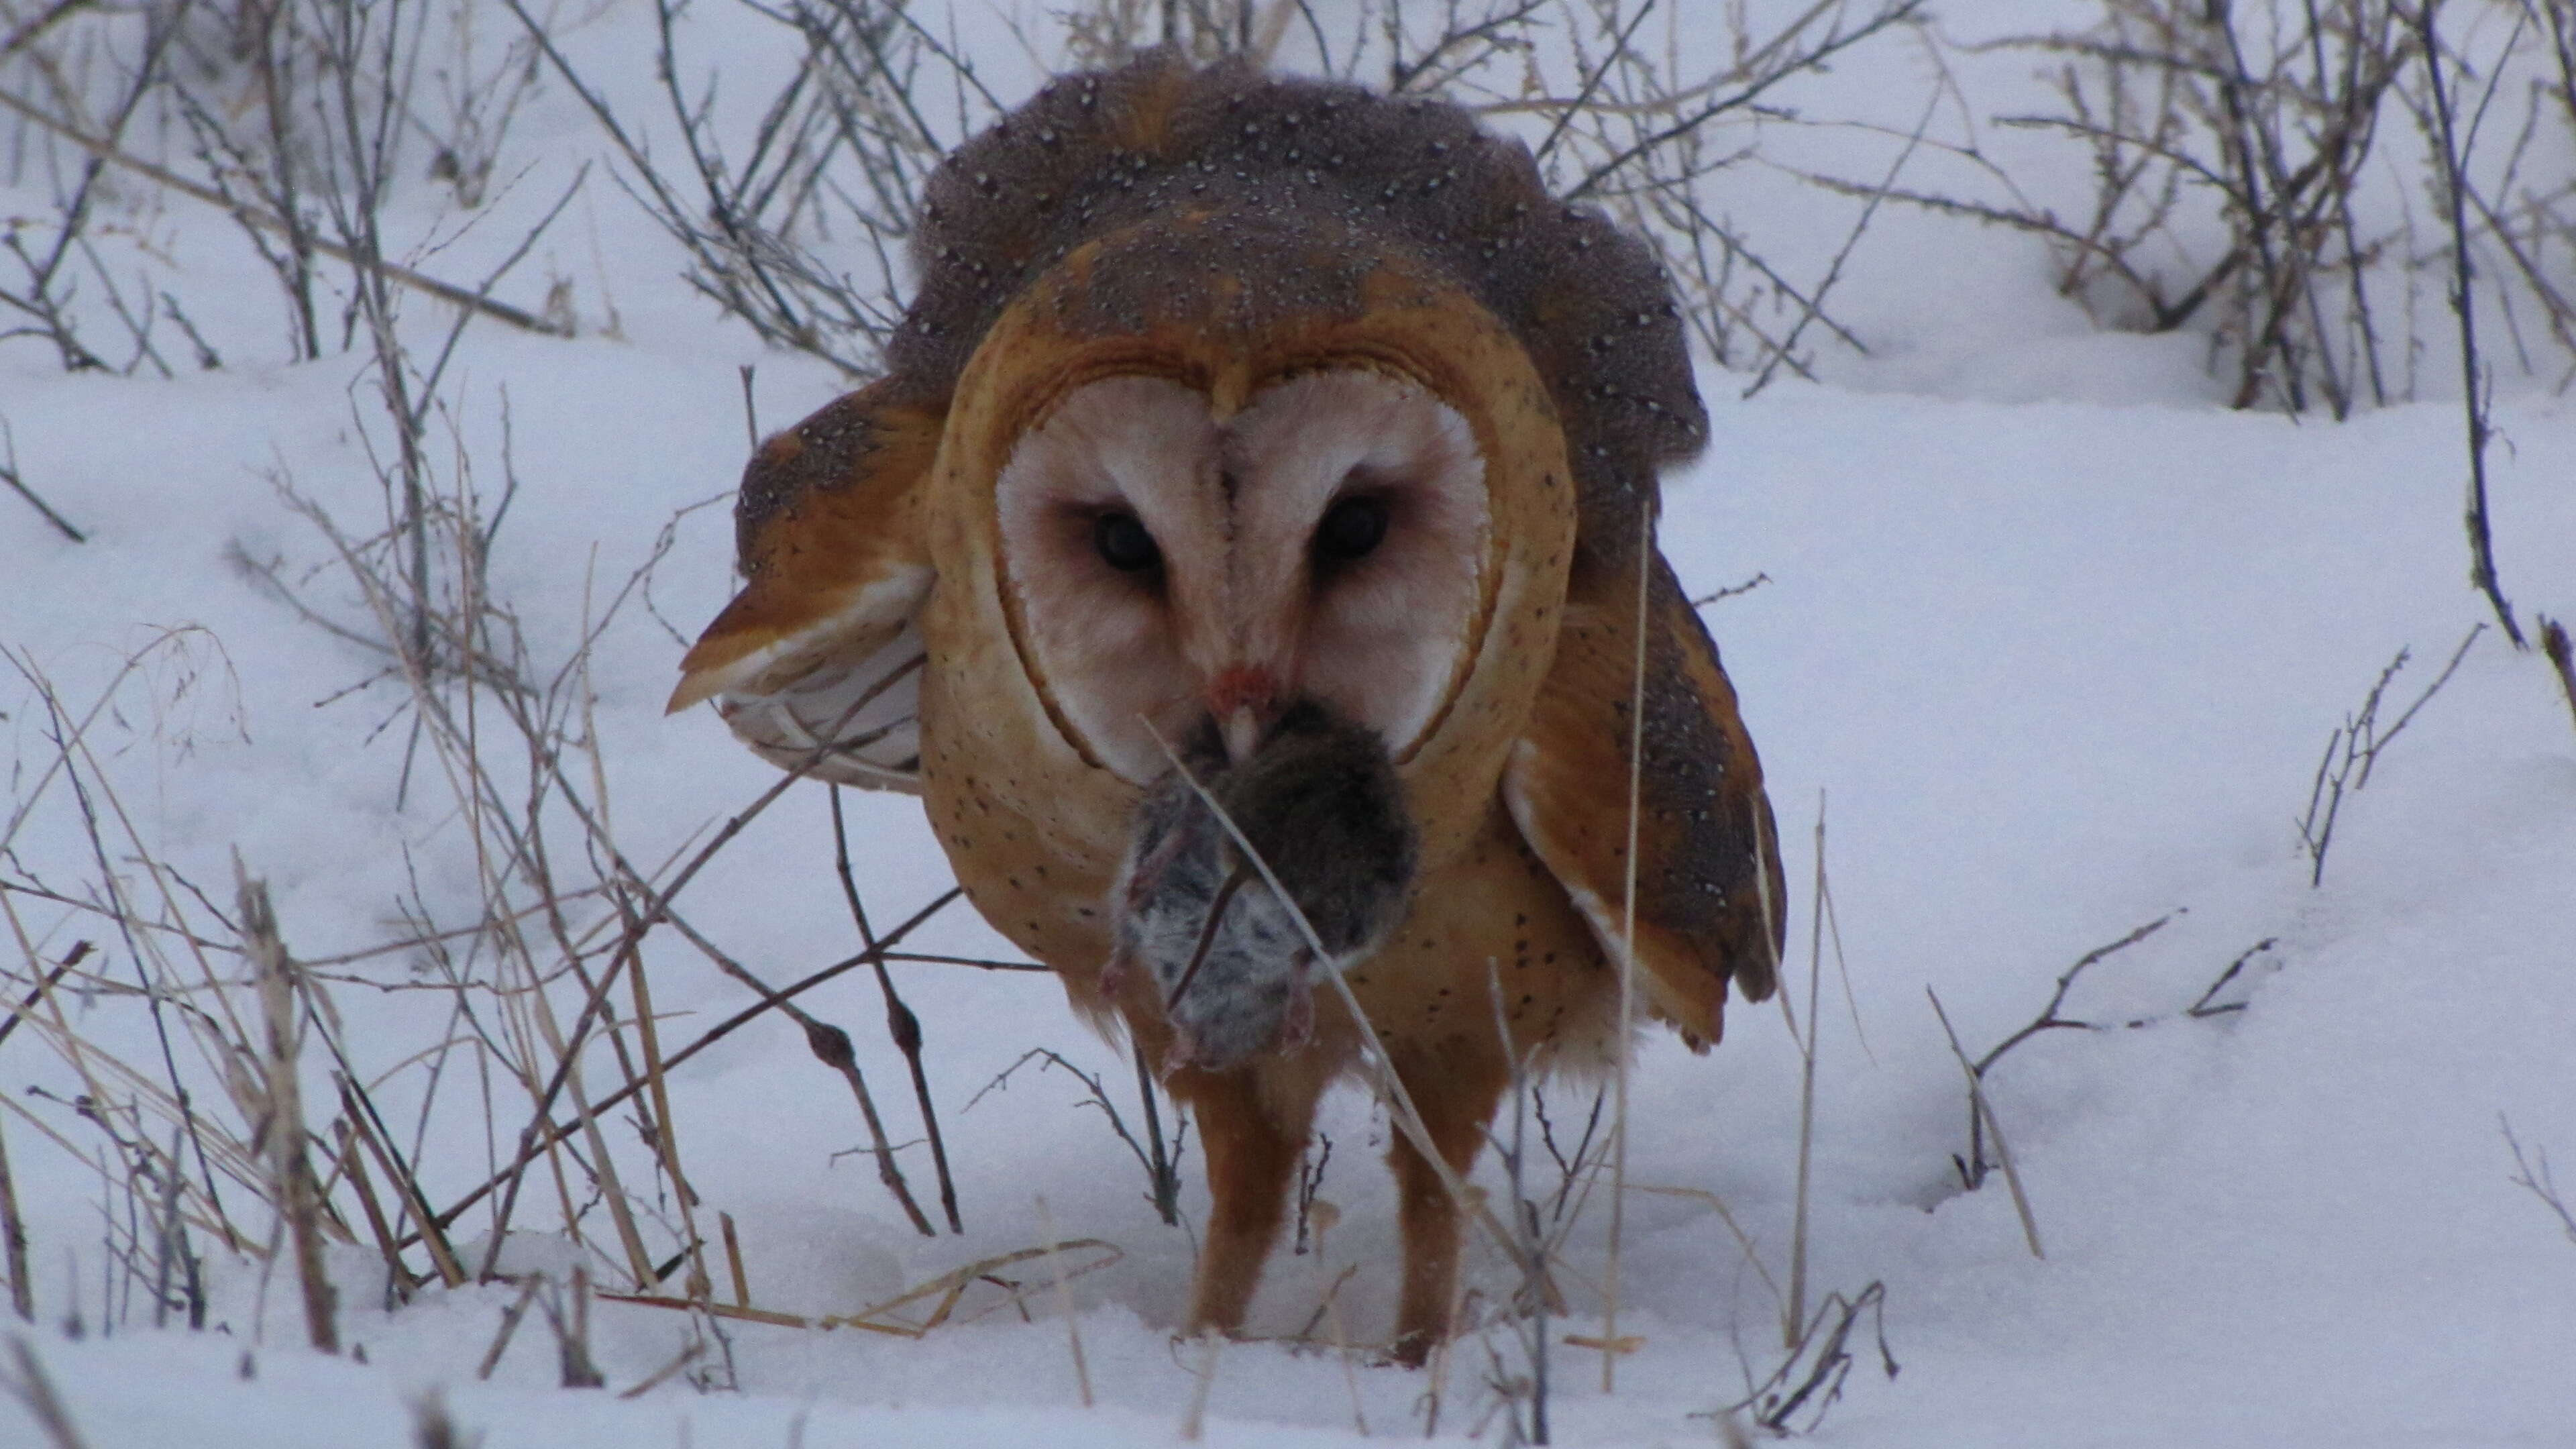 Image of barn owls, masked owls, and bay owls